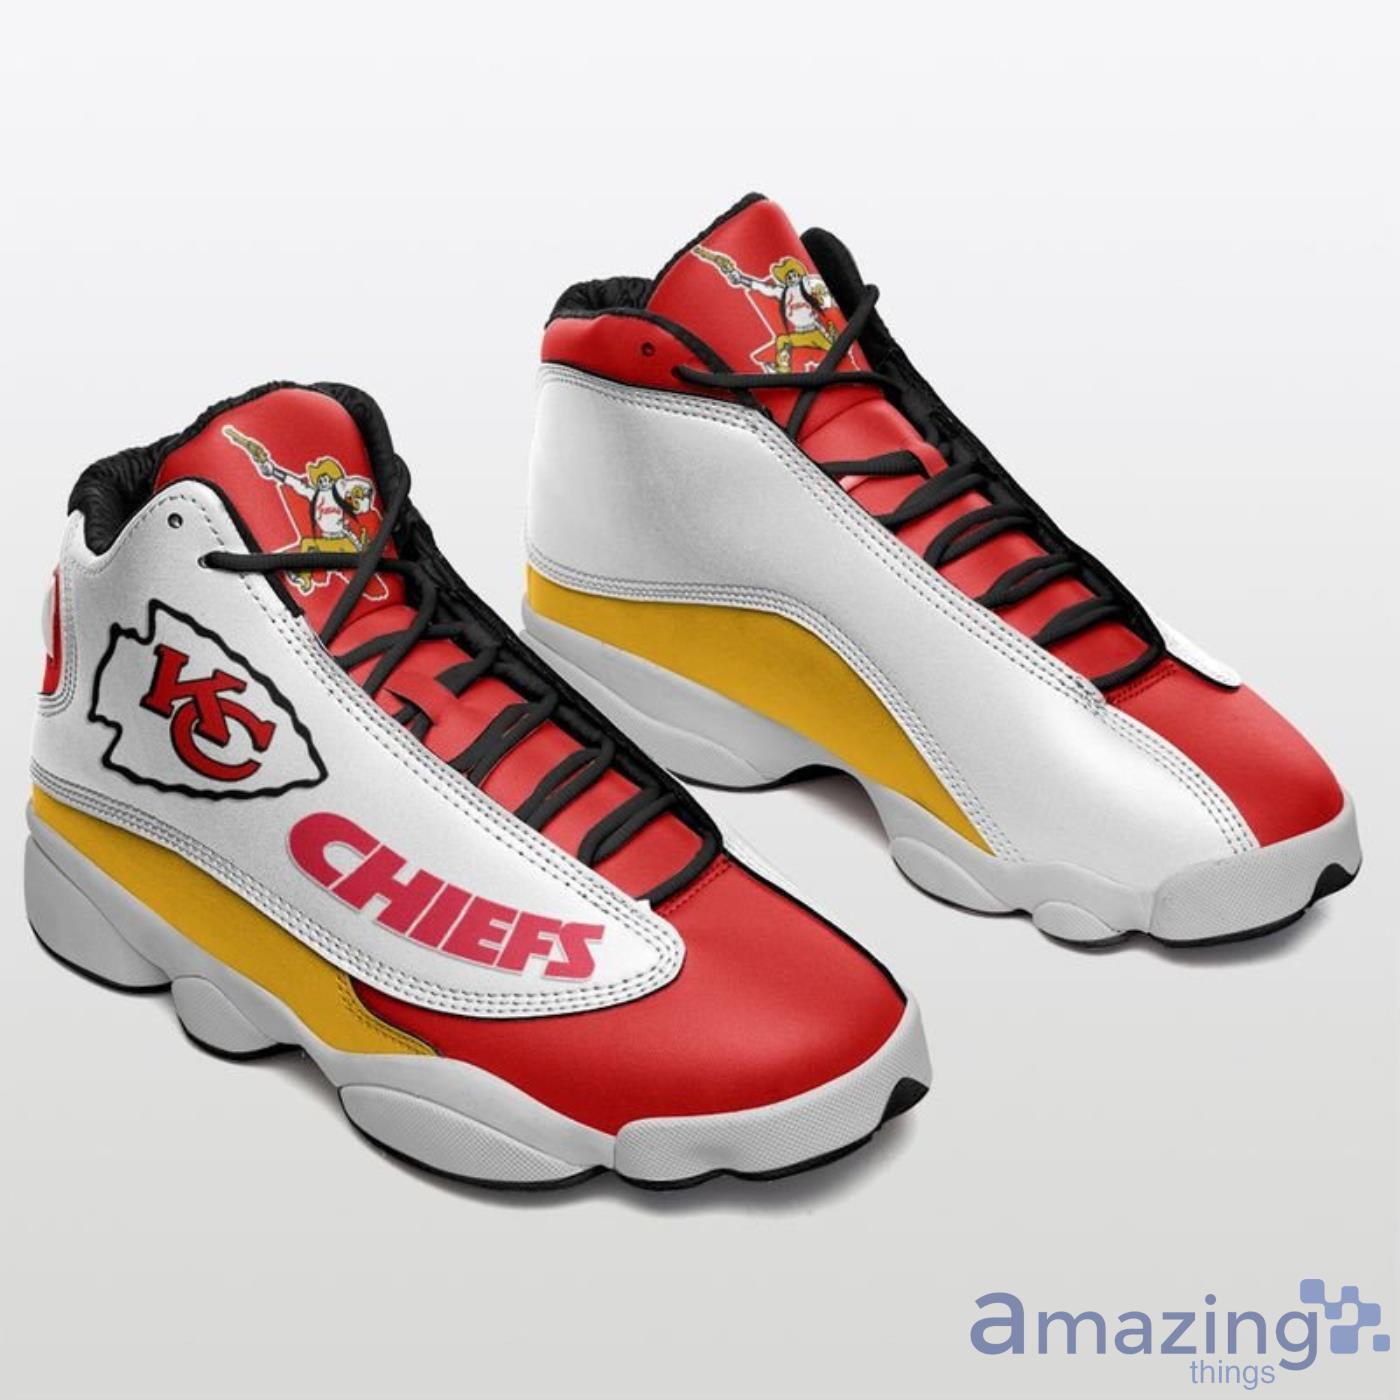 Nfl Kansas City Chiefs Limited Edition Air Jordan 13 For Fans Sneakers